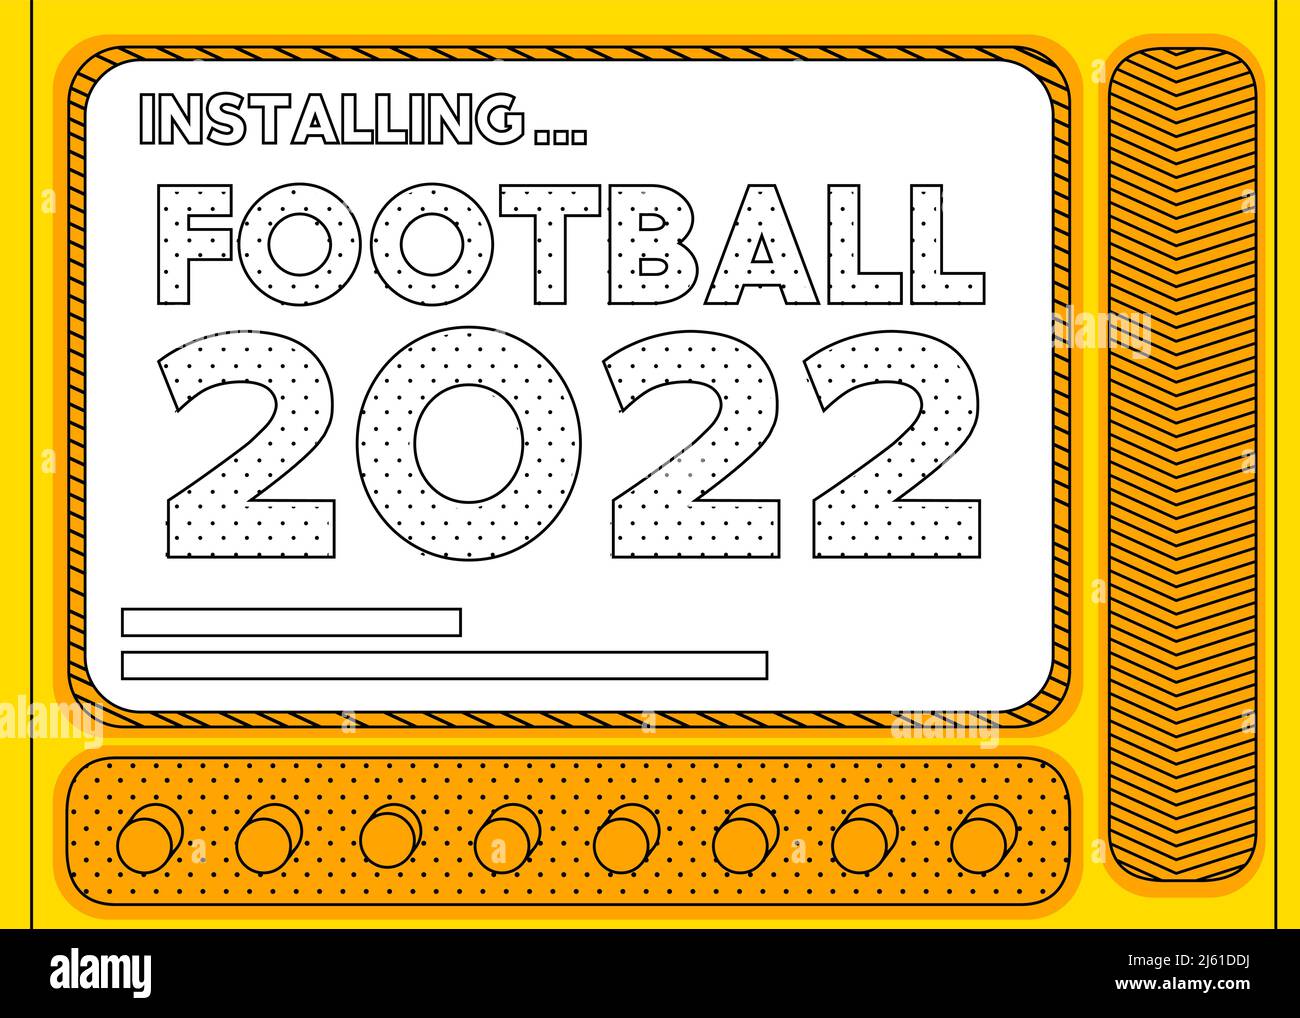 Cartoon Computer With the word Football 2022. Message of a screen displaying an installation window. Stock Vector